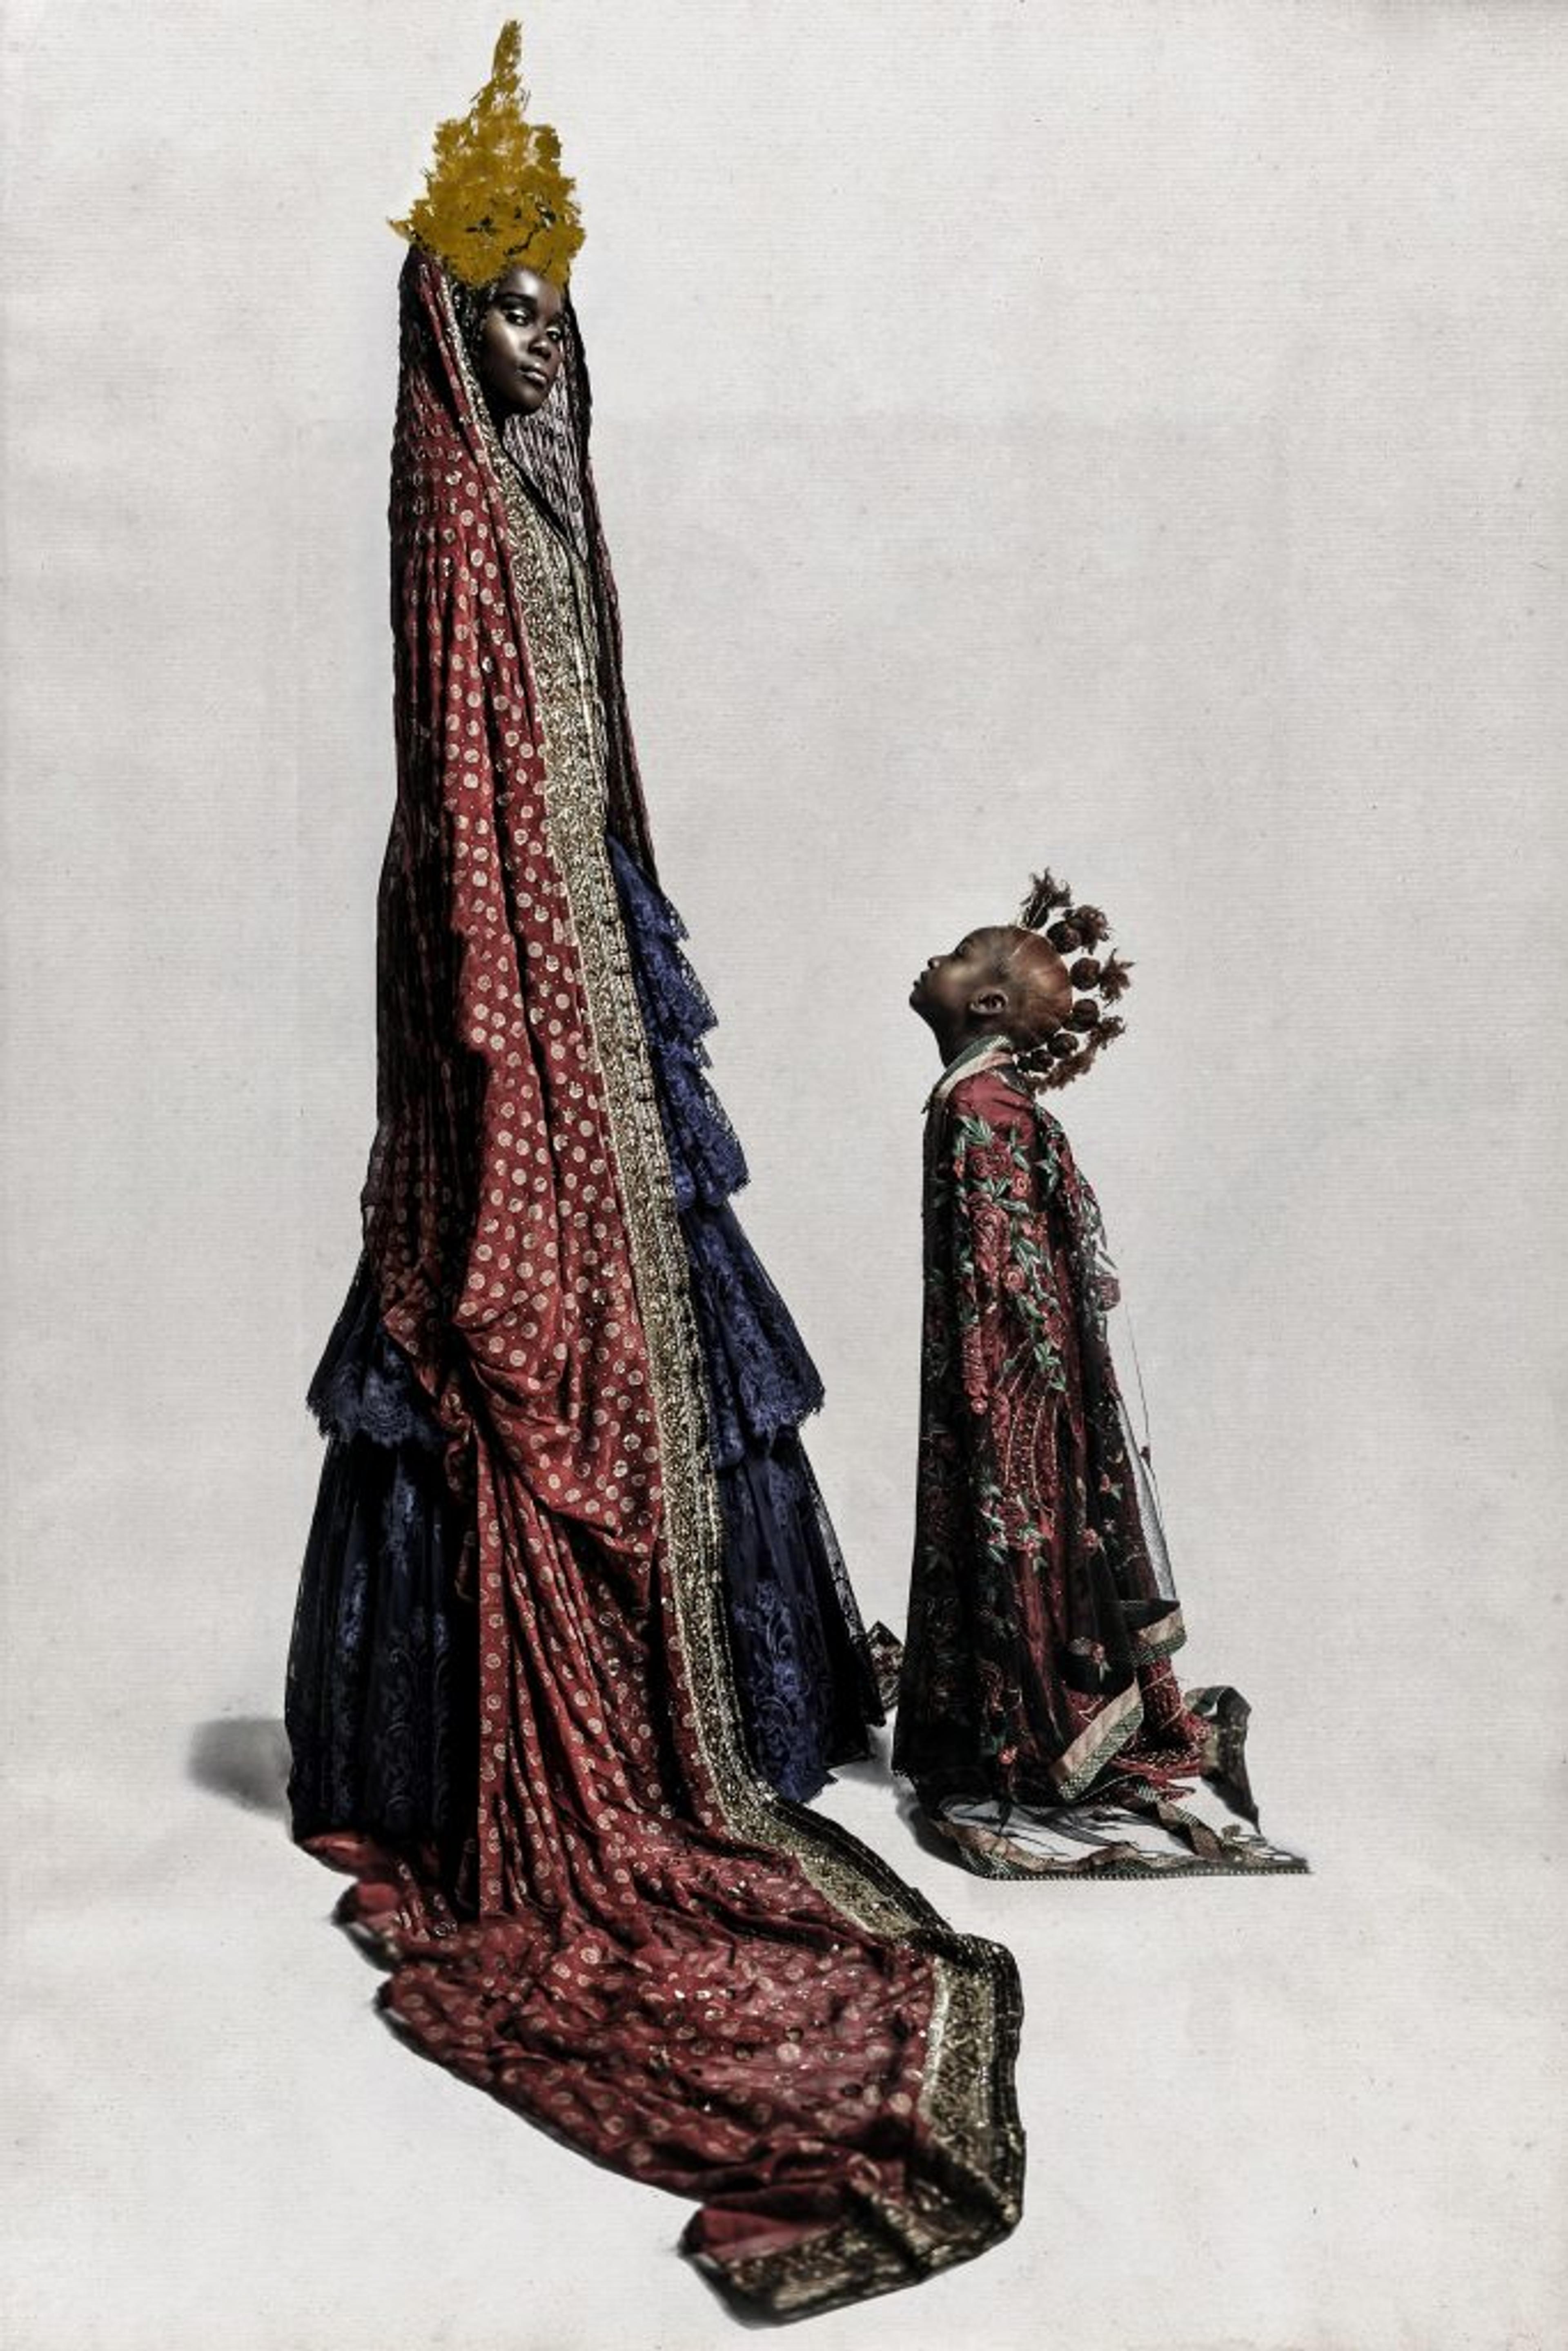 A photograph of a child looking up at an adult wearing a crown and long, flowing garments